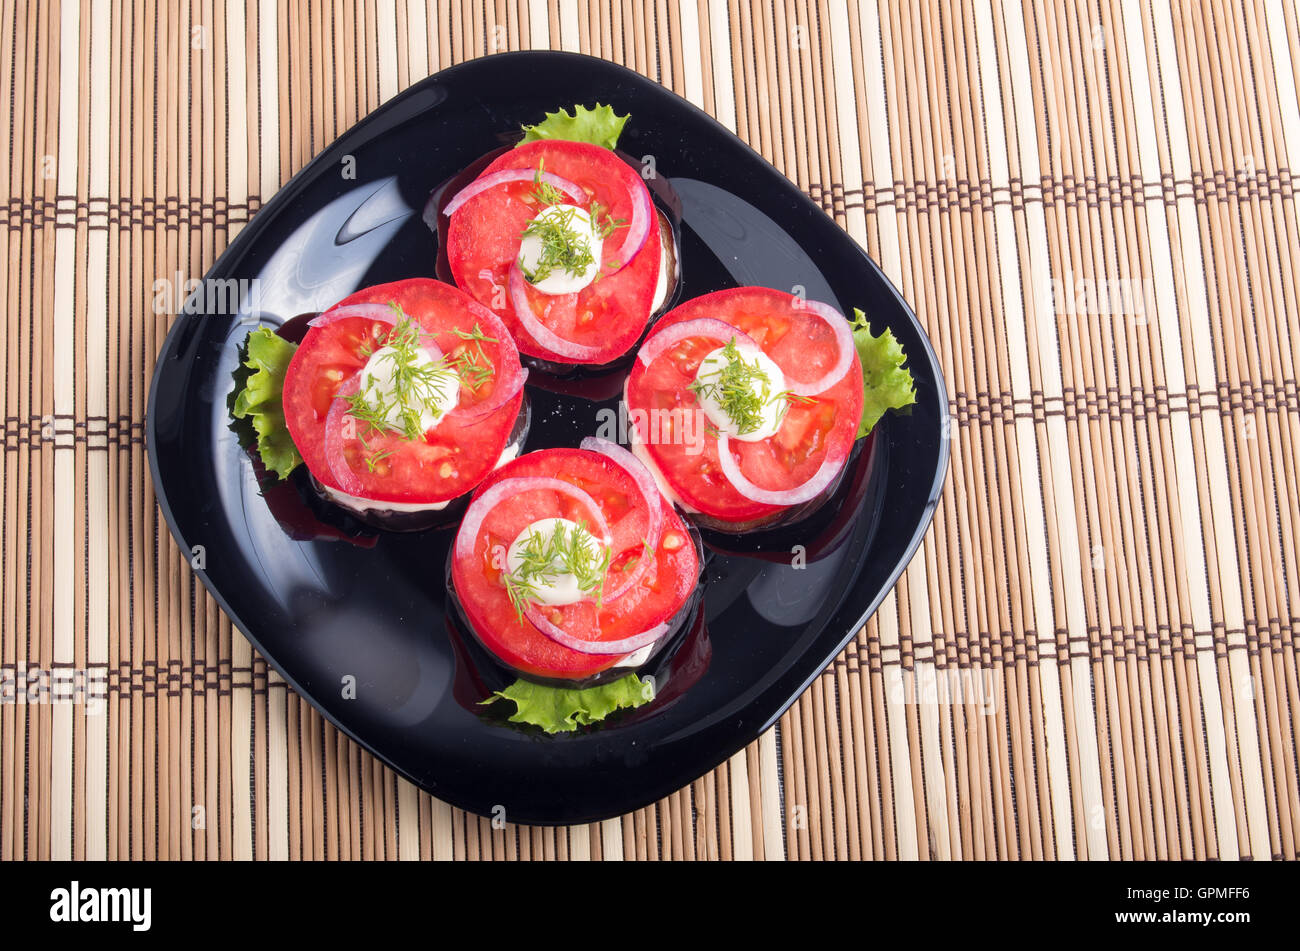 Top view of a sliced red tomatoes slices, decorated with onion and dill on a black plate on a mat made of bamboo Stock Photo